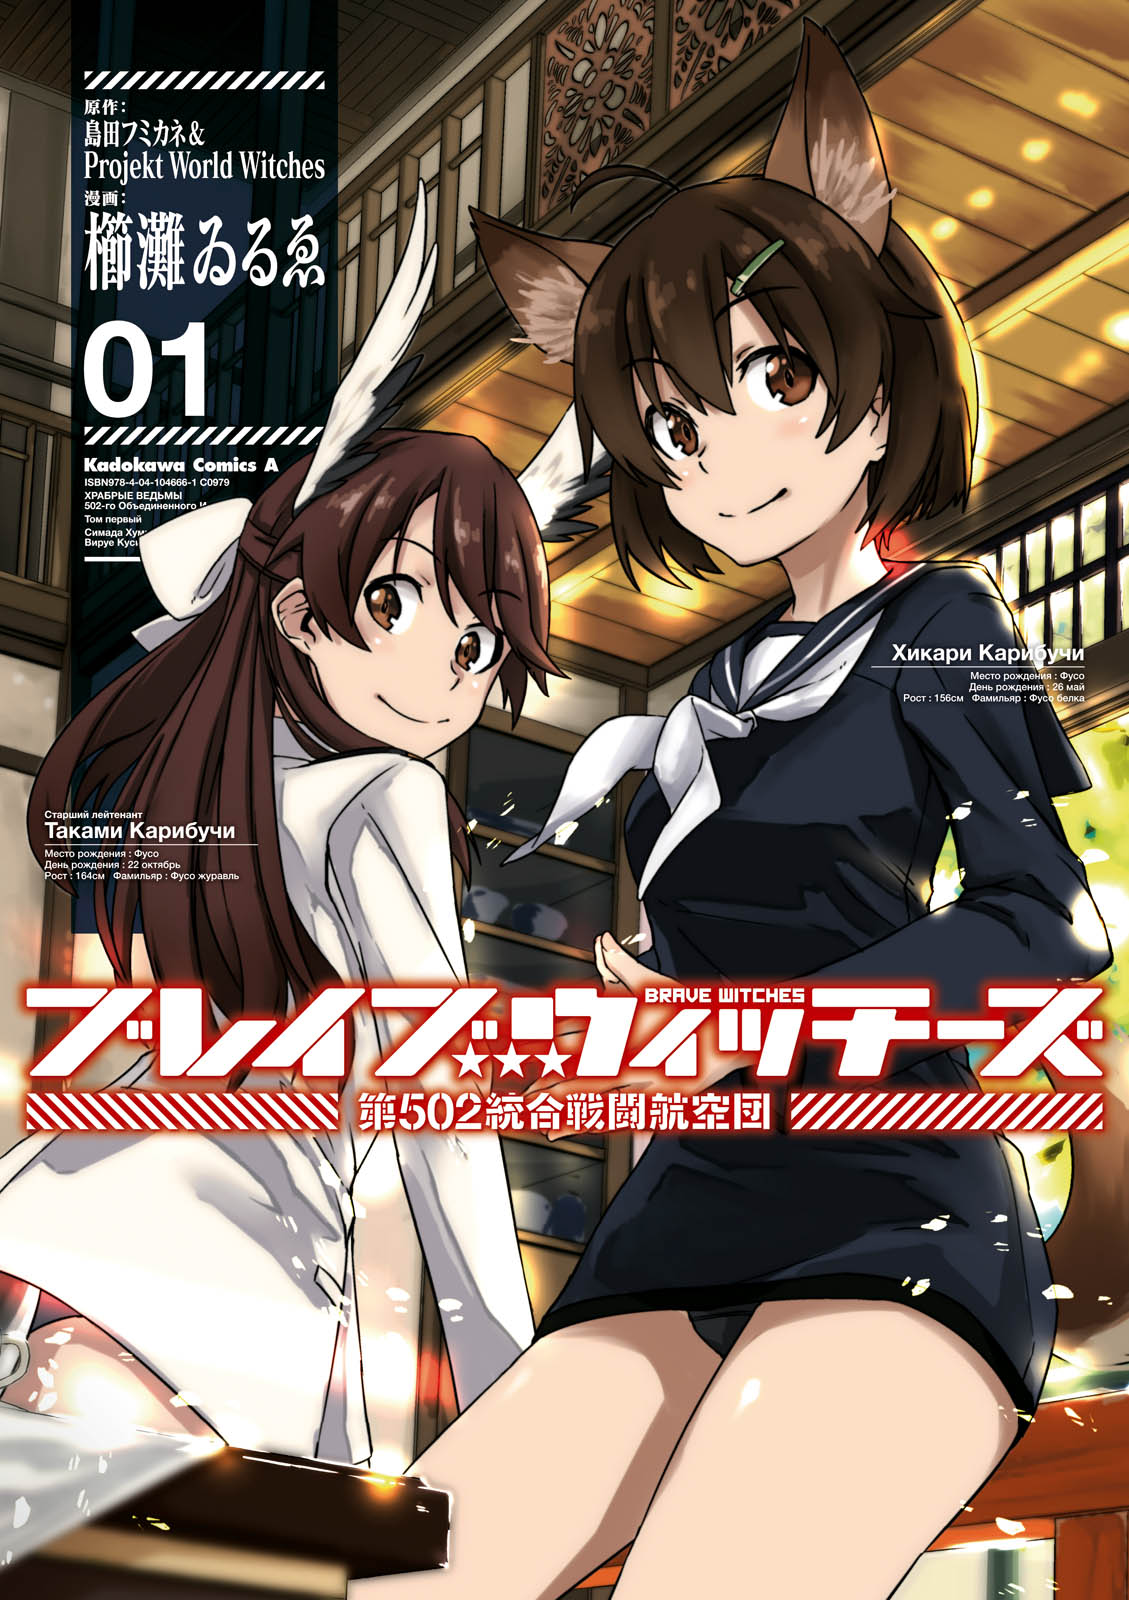 Brave Witches Complete Series | DVD, Blu-ray | Buy Now | at Mighty Ape NZ